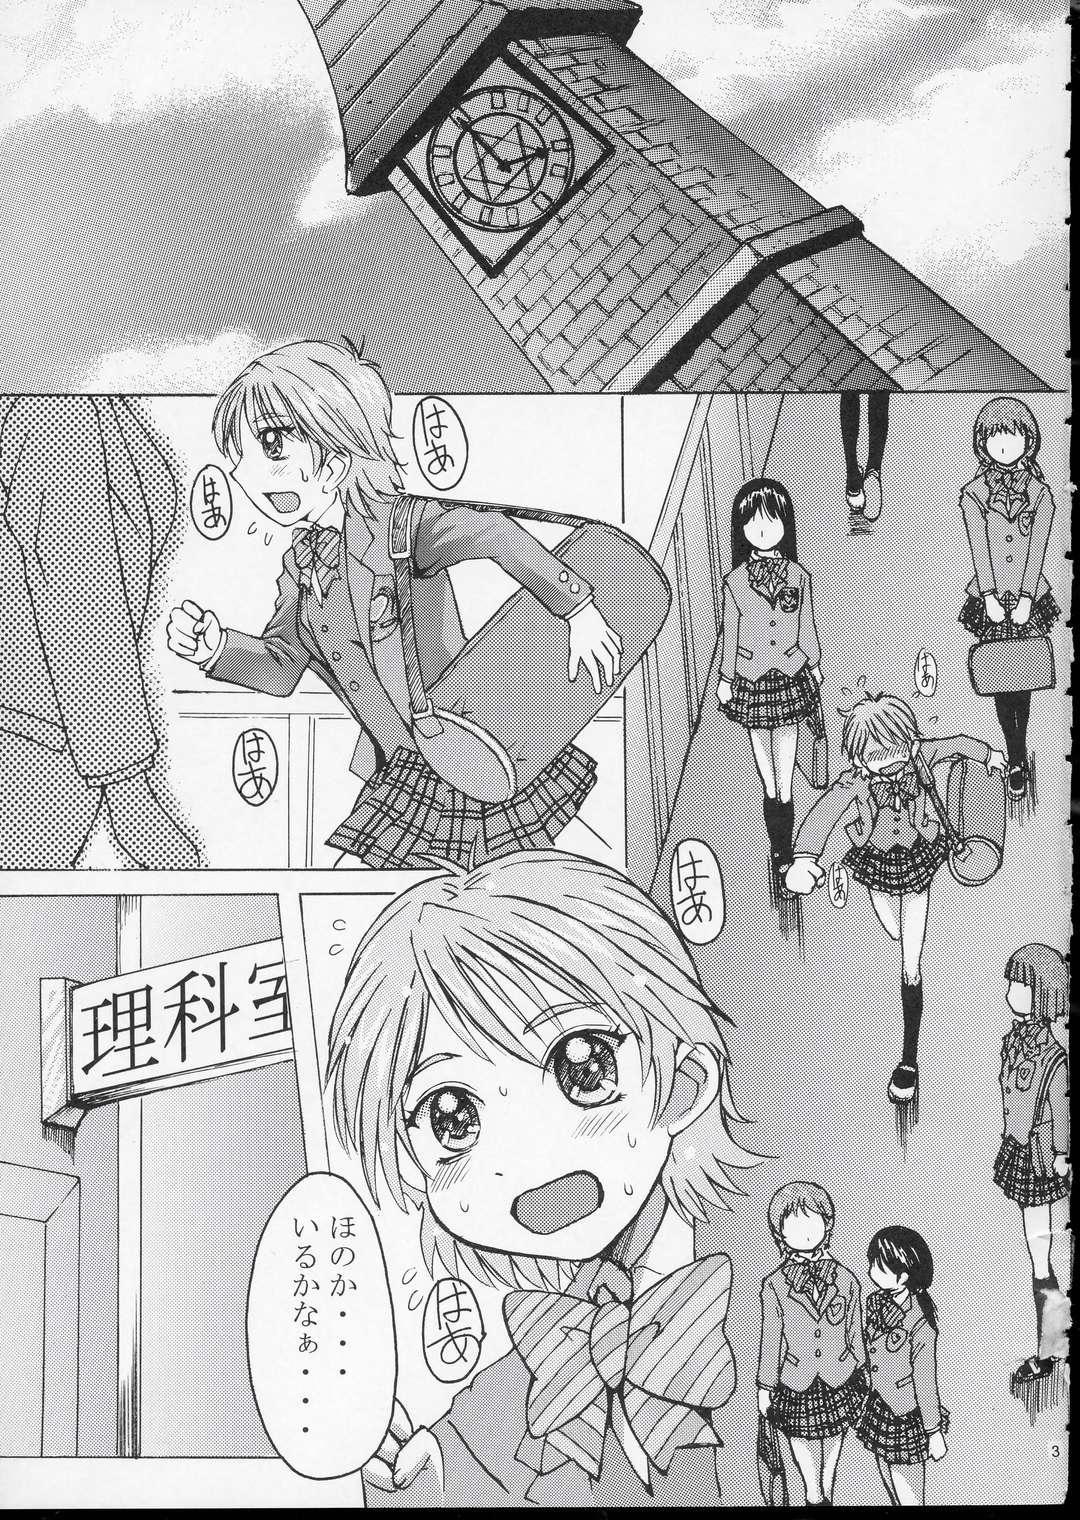 Gaping Kuroi Taiyou Kage no Tsuki EPISODE 1: In order that all may love you - Black Sun and Shadow Moon - Pretty cure Hot Girl Porn - Page 4